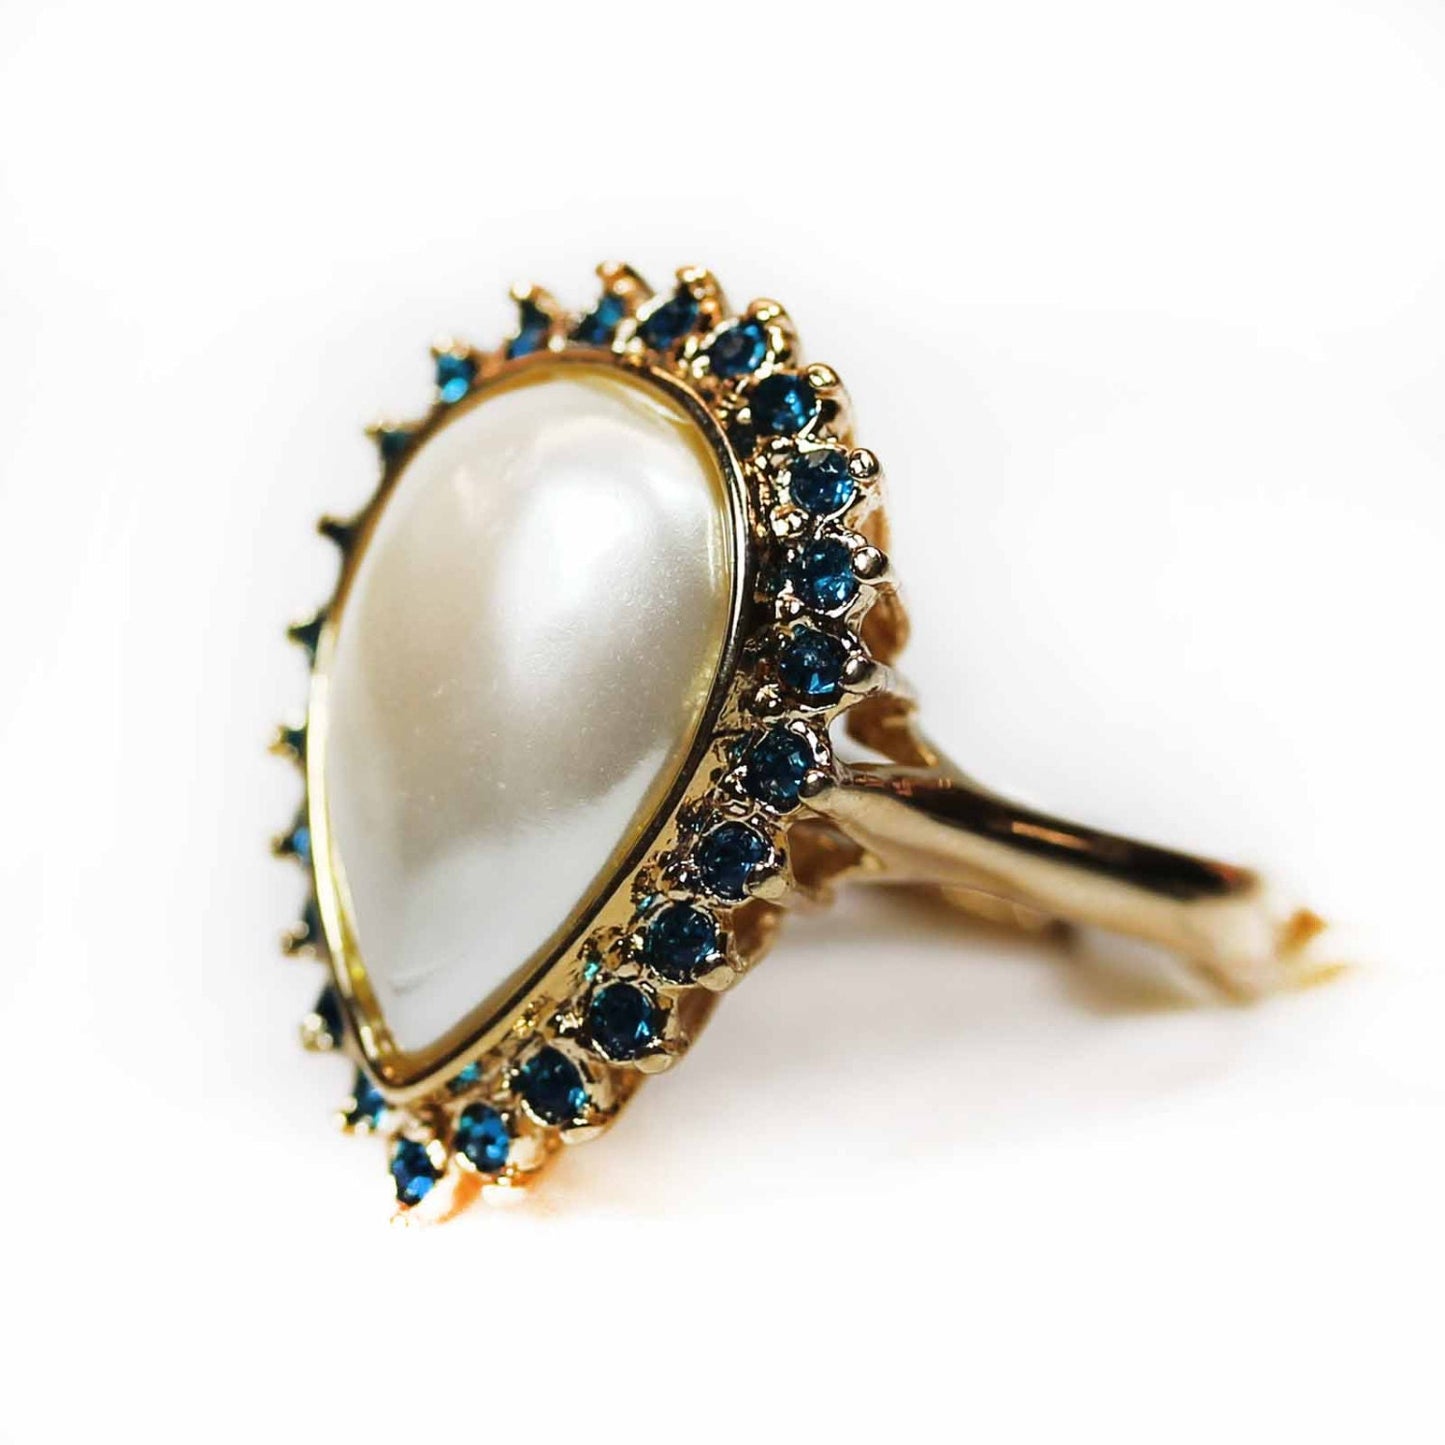 Vintage Ring Pear Shaped Pearl Bead Royal Blue Swarovski Crystals 18k Gold Cocktail Ring Antique Womans #R2045 - Limited Stock - Never Worn